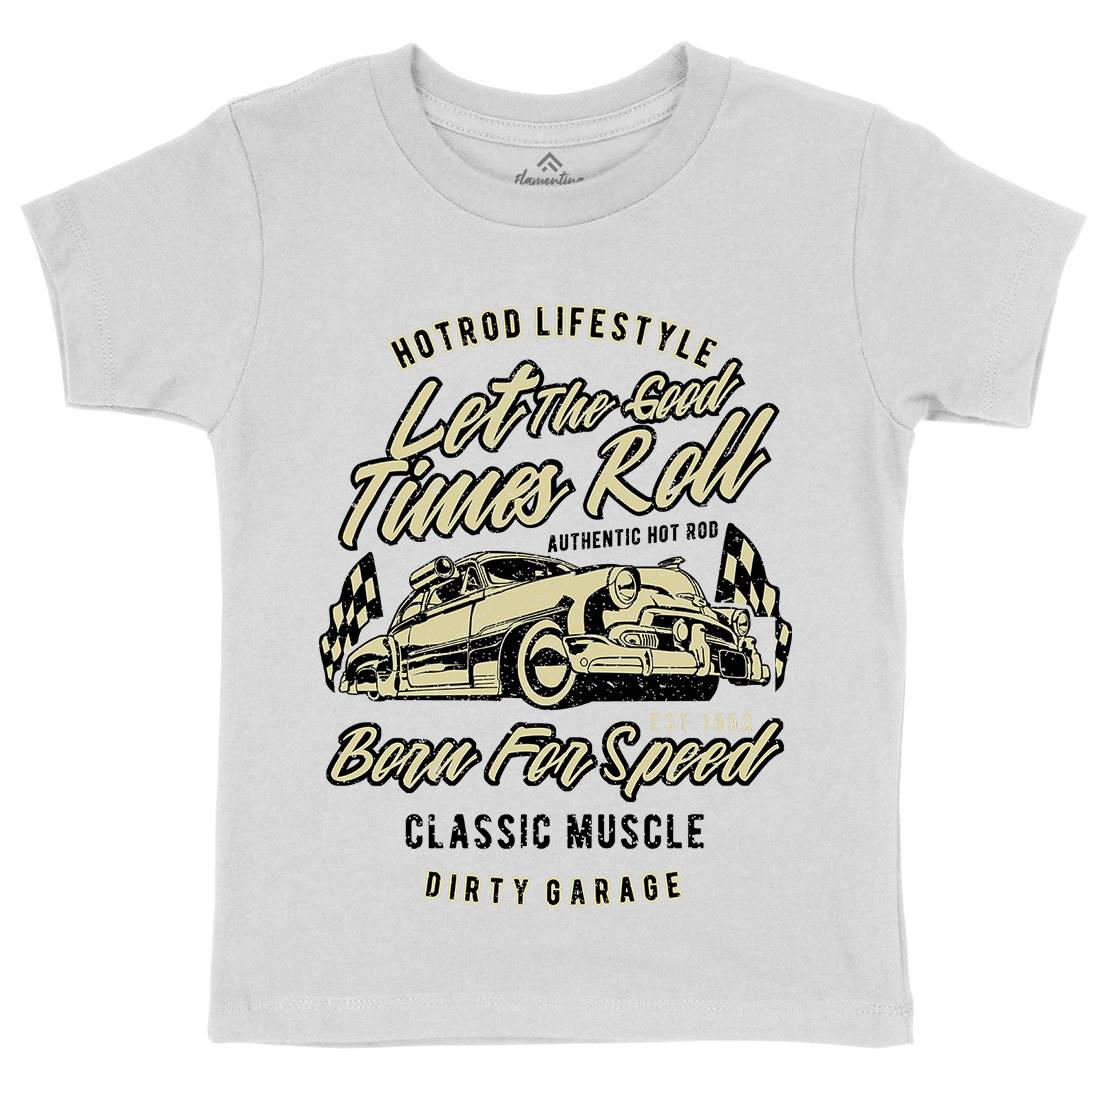 Let The Good Times Roll Kids Crew Neck T-Shirt Cars A705